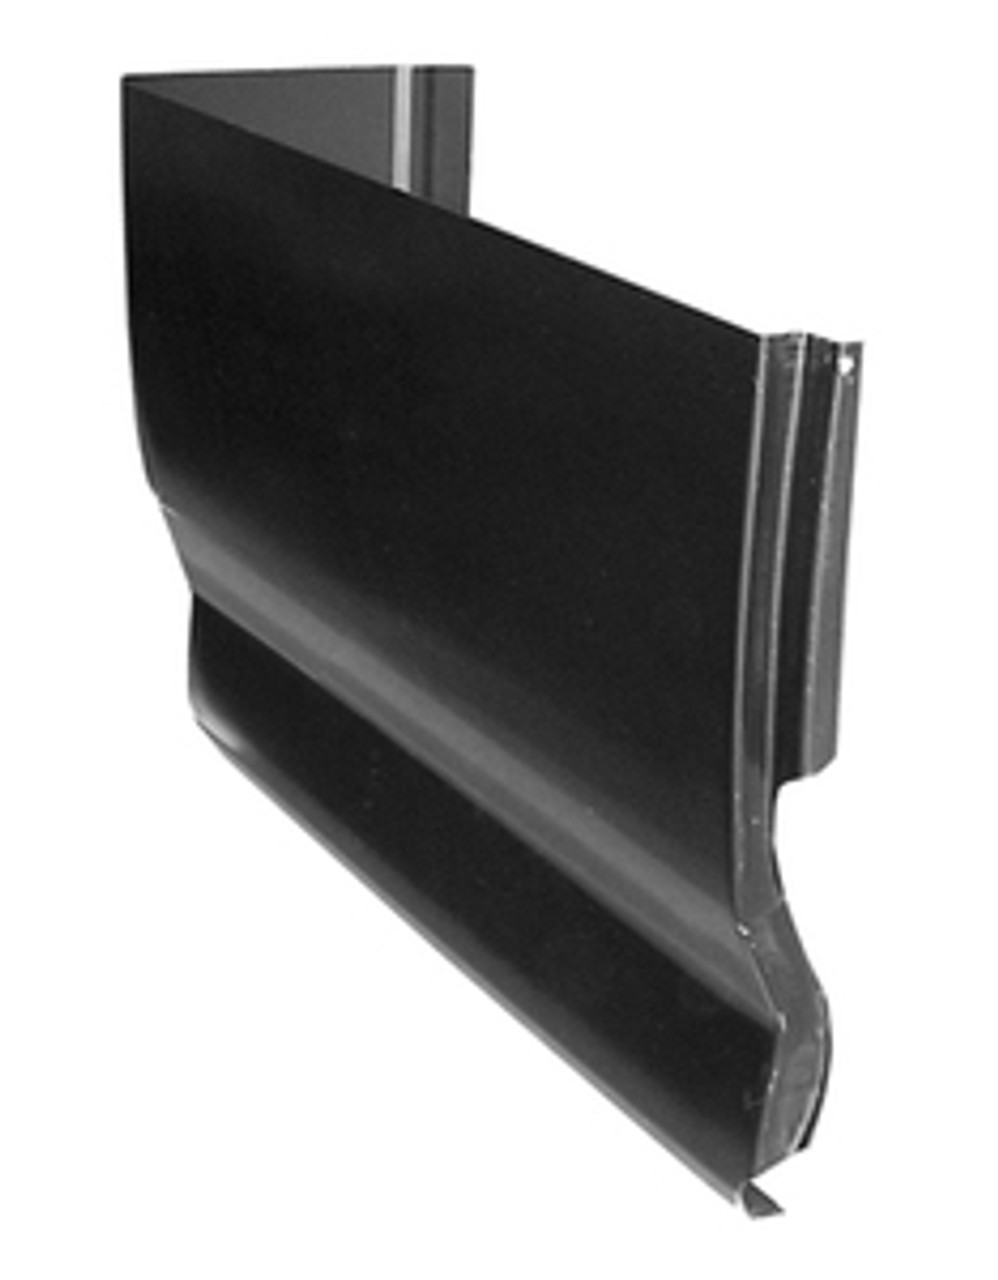 Rh 1980-1996 Ford Pickup and 97-98 F250HD F350 Cab Corner 2 Door Extended Cab